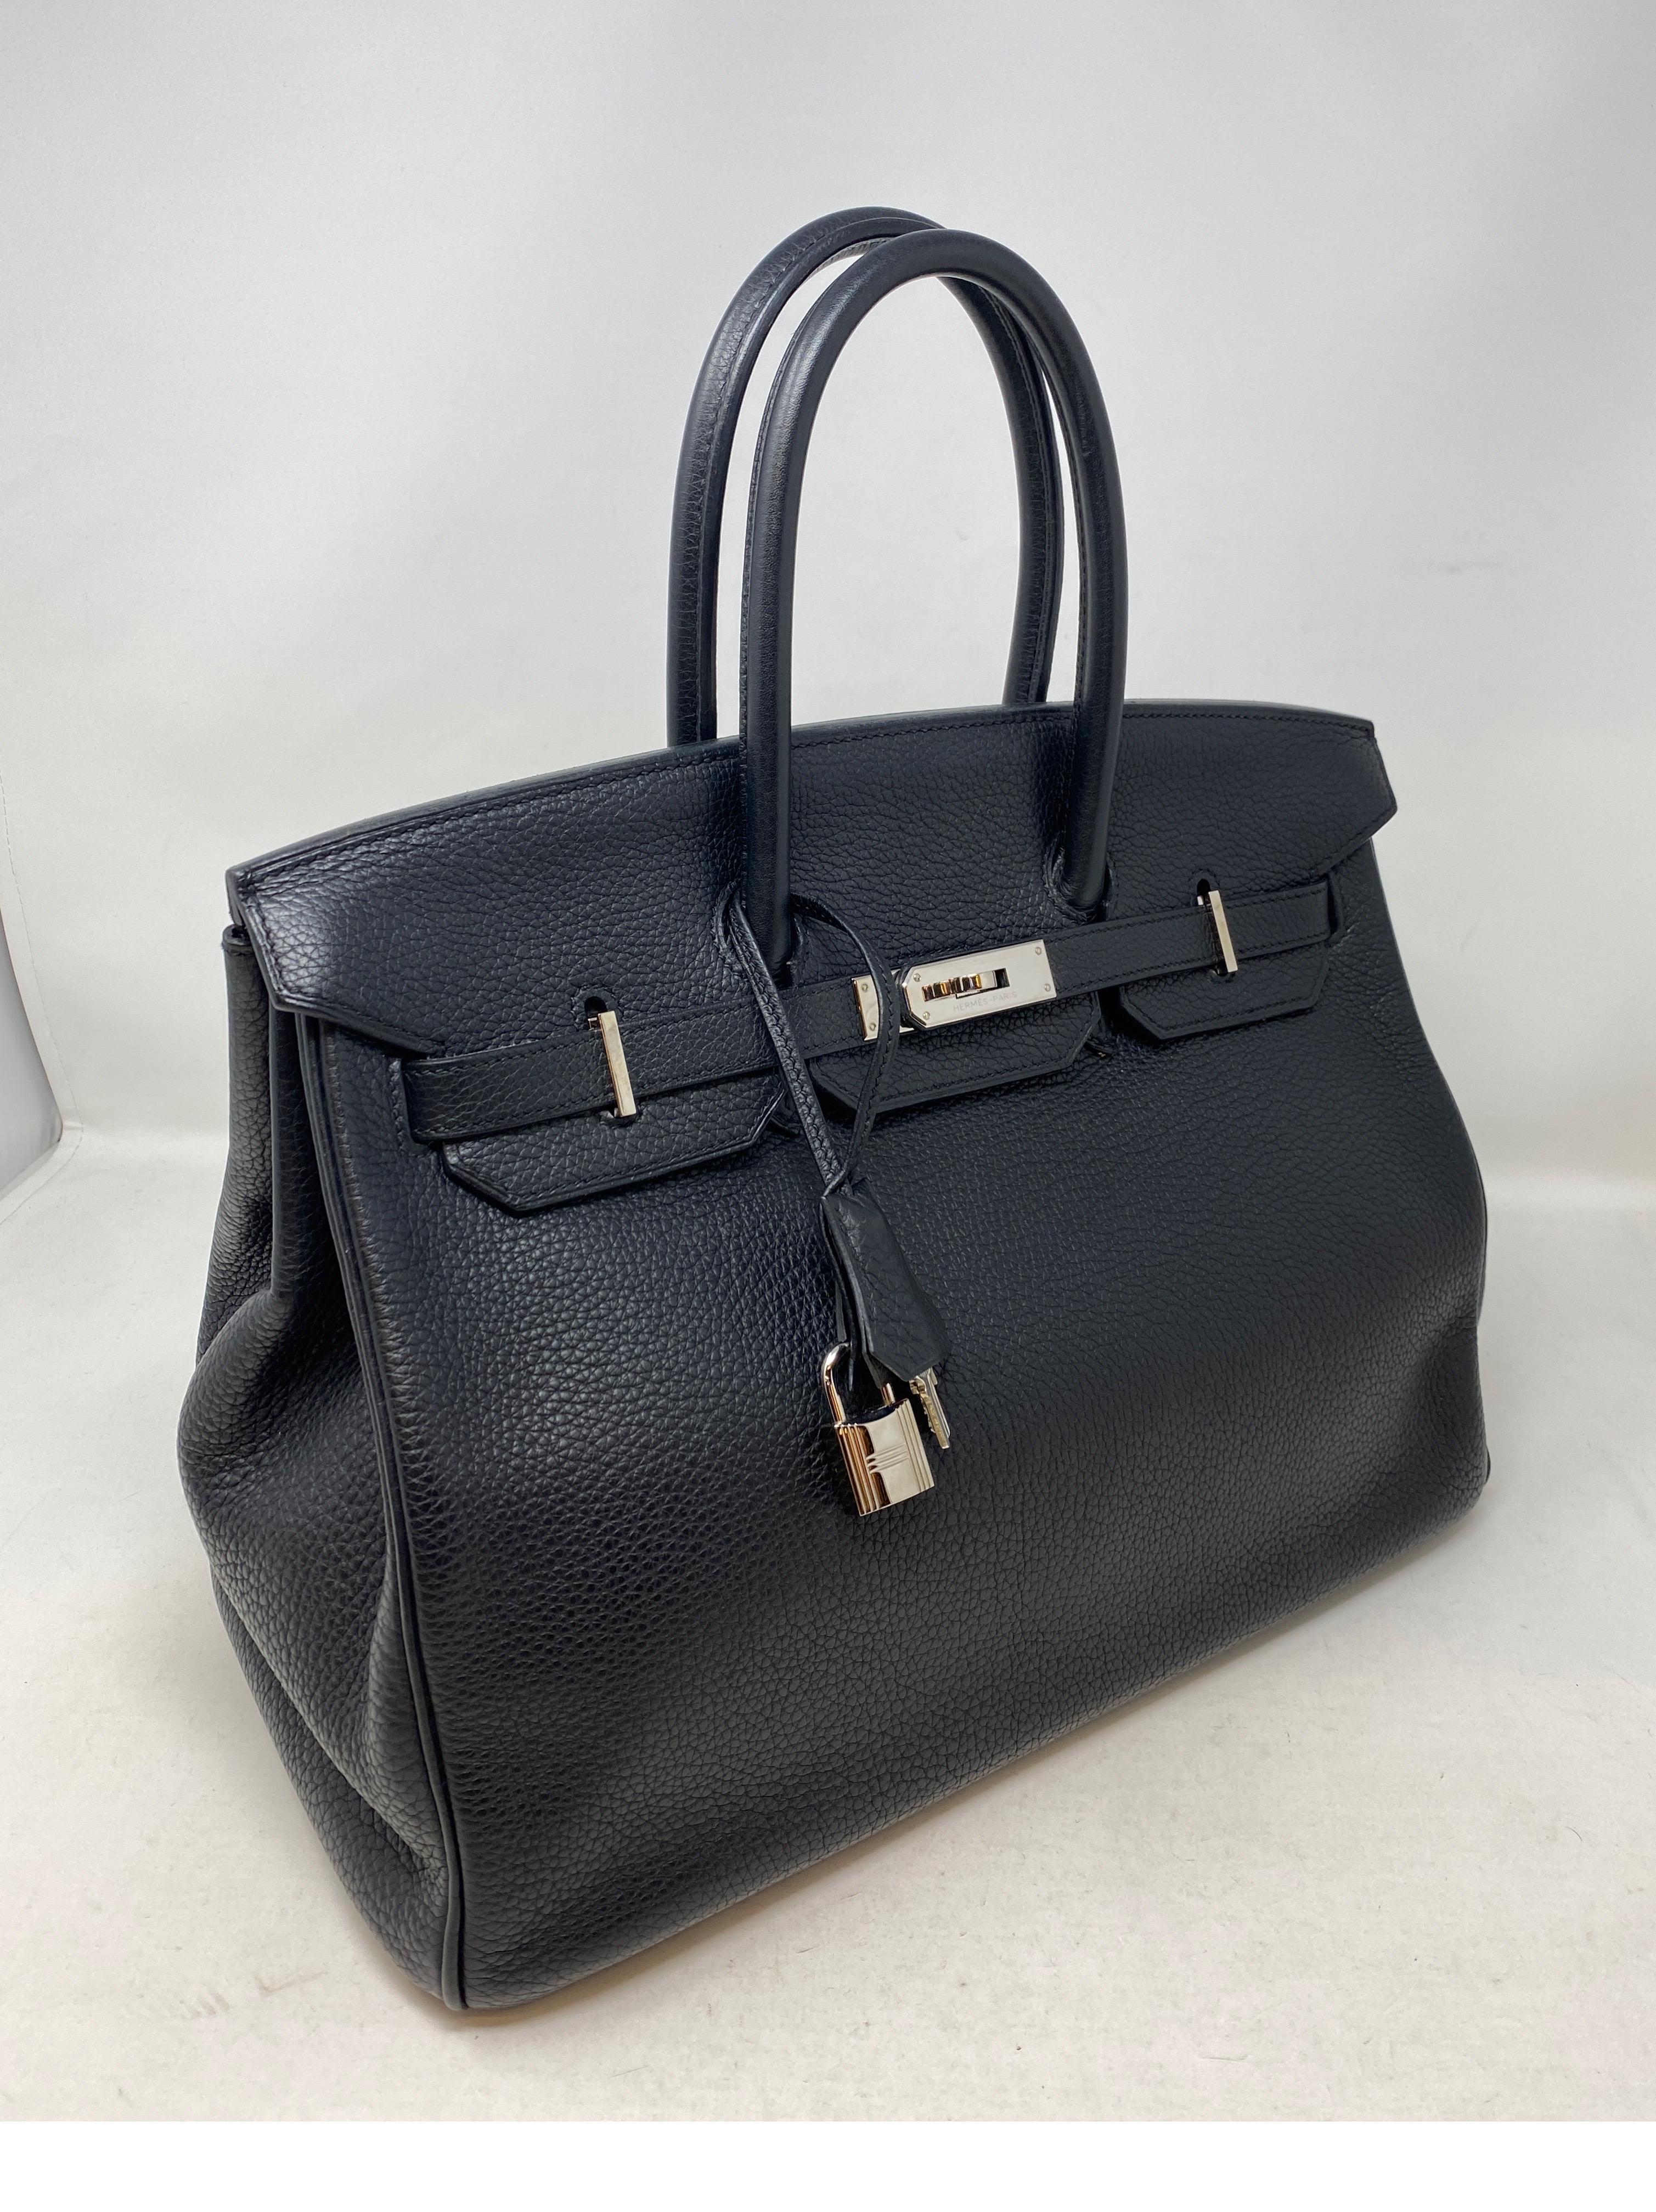 Hermes Black Birkin 35 Bag. Excellent condition. Palladium hardware. Classic black Birkin. Great investment. Includes clochette, lock, keys, and dust cover. Guaranteed authentic. 